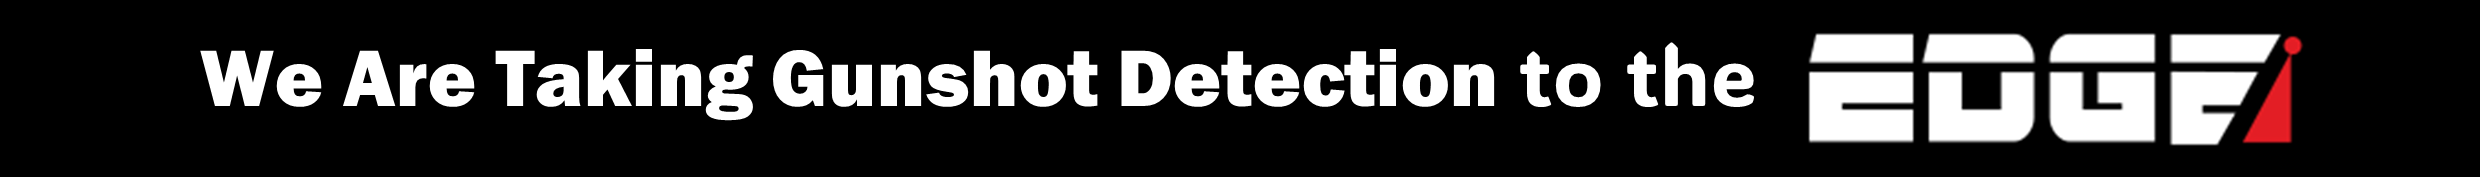 The S8 and S1 Units are the ONLY Gunshot Detection Solution designed with Ultrasonic Detection!
ontheedge@edge-detect.com
(770) 694-6218 x1 for more information!

  ,A circle with stars and stripes in the middle

Description automatically generated